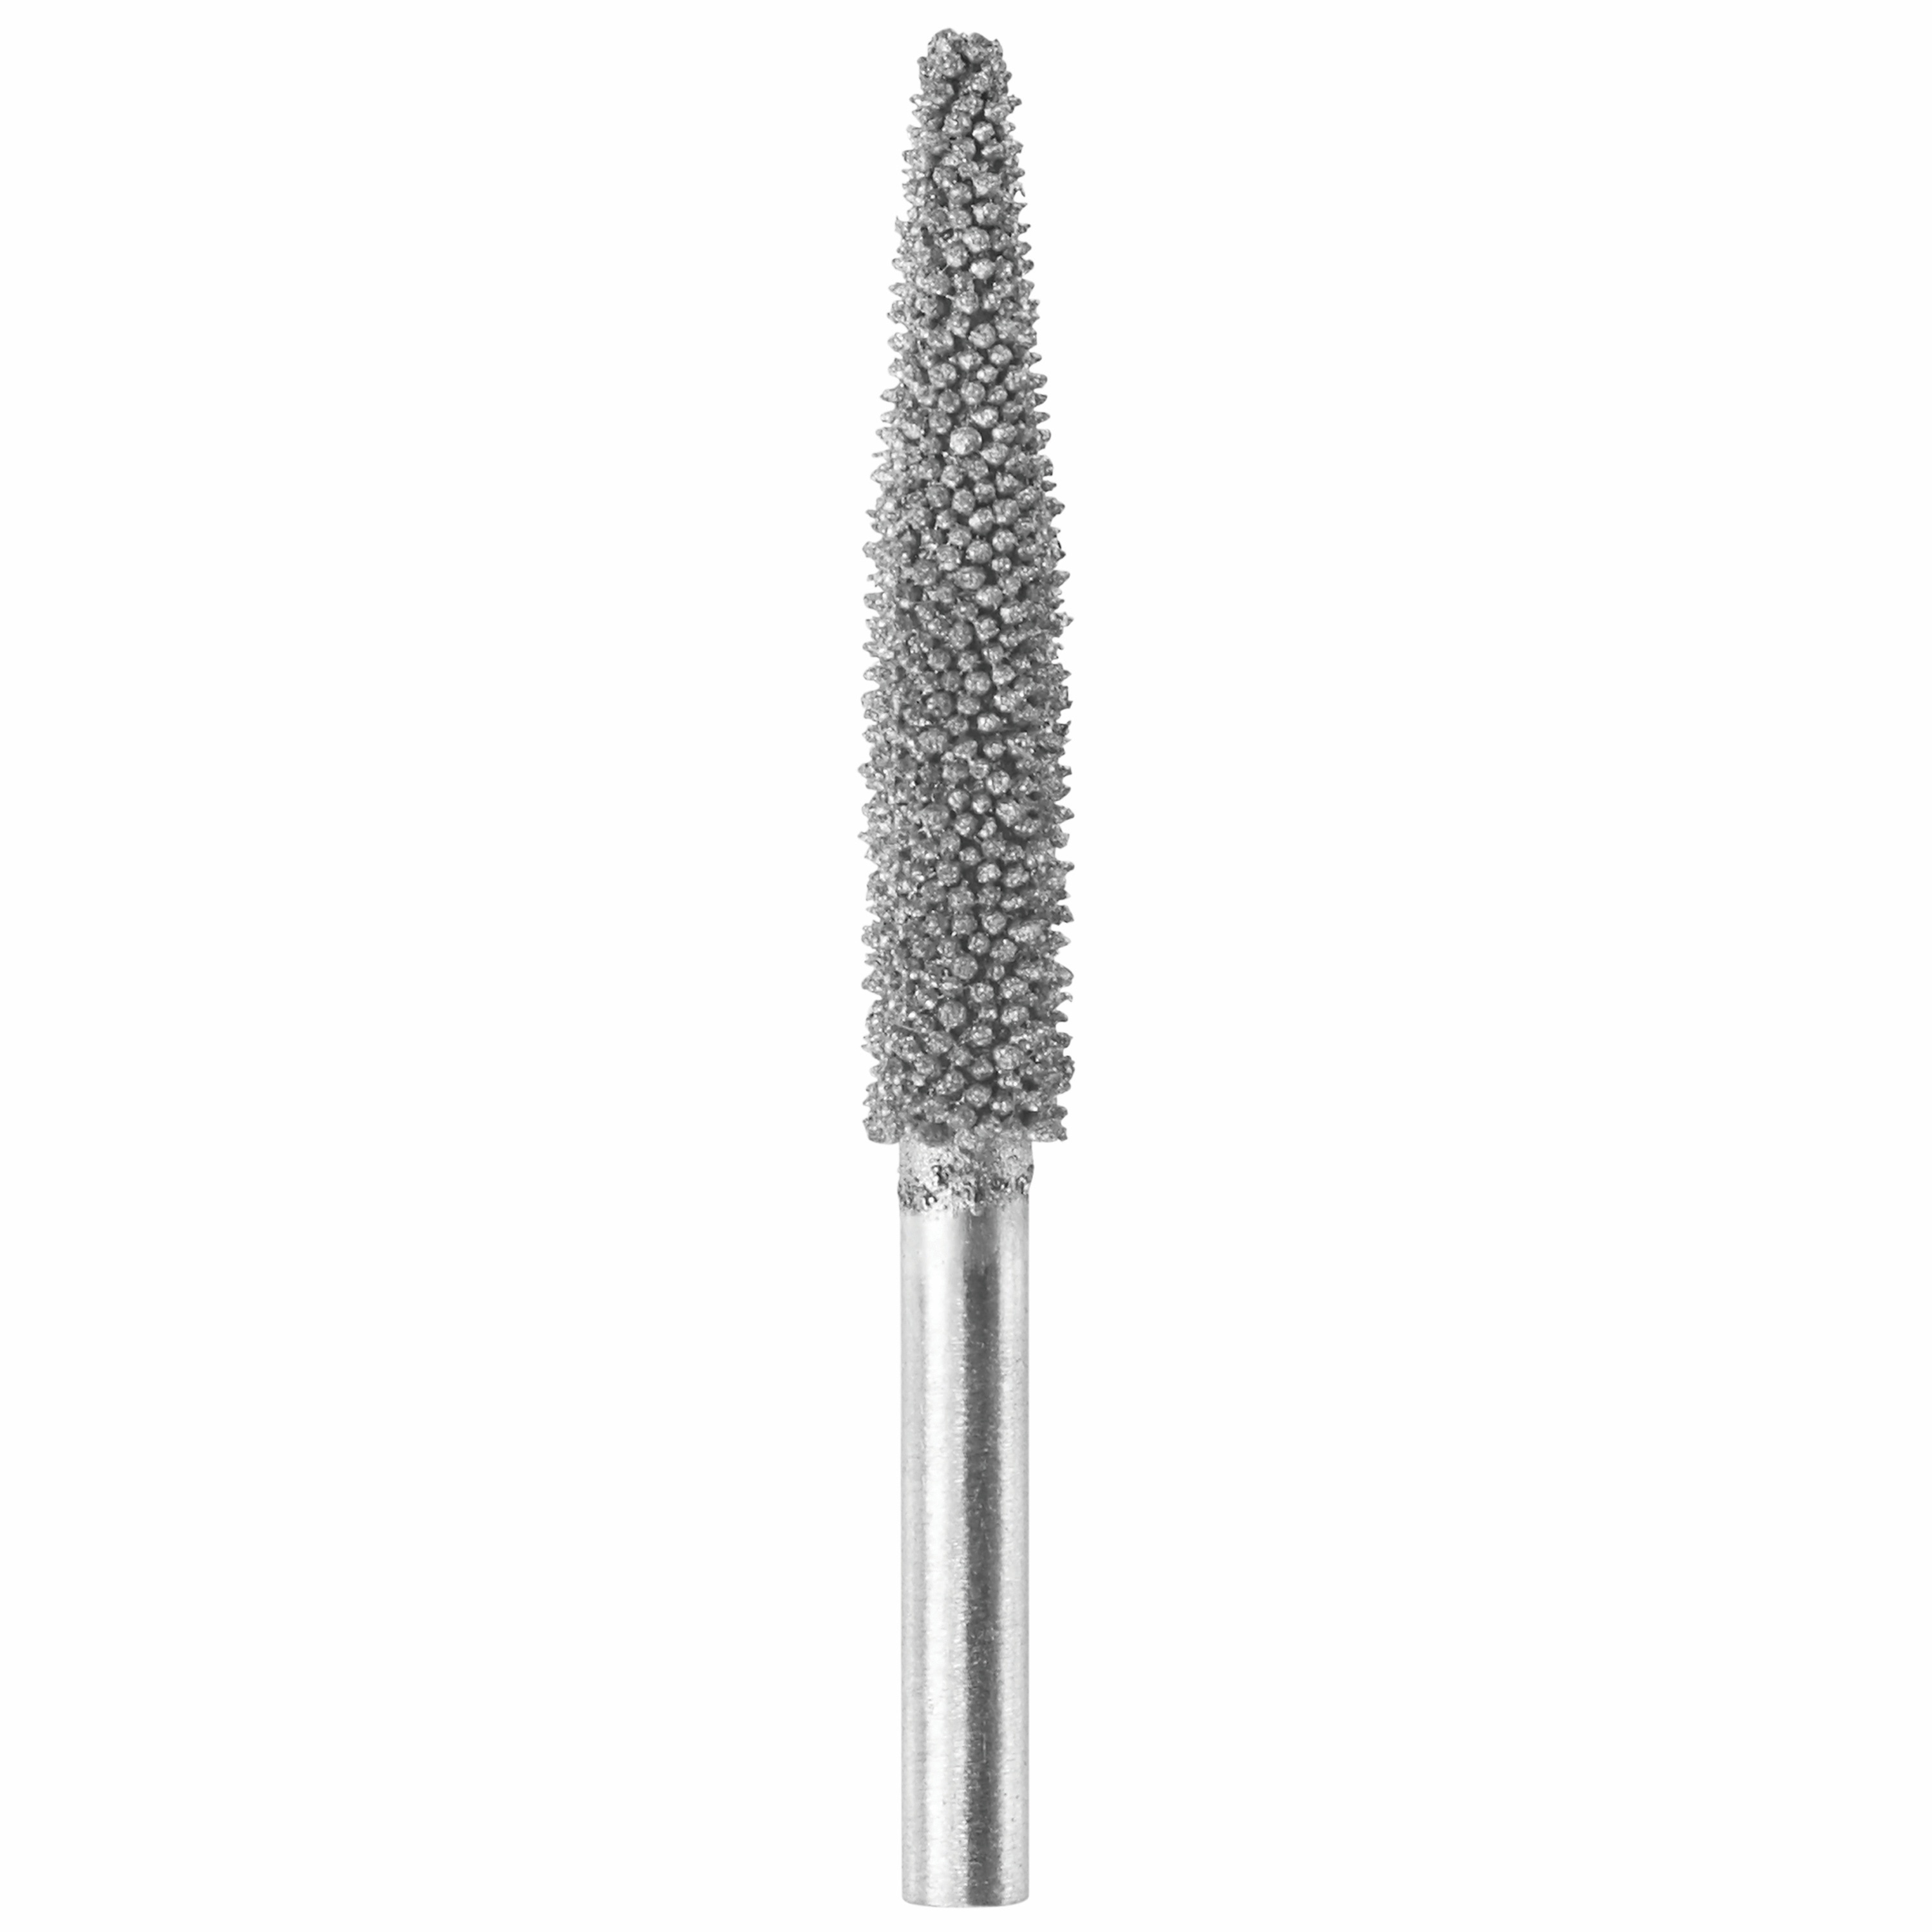 Dremel 9934 Structured Tooth Tungsten Carbide Carving Bit, tapered, 0.31